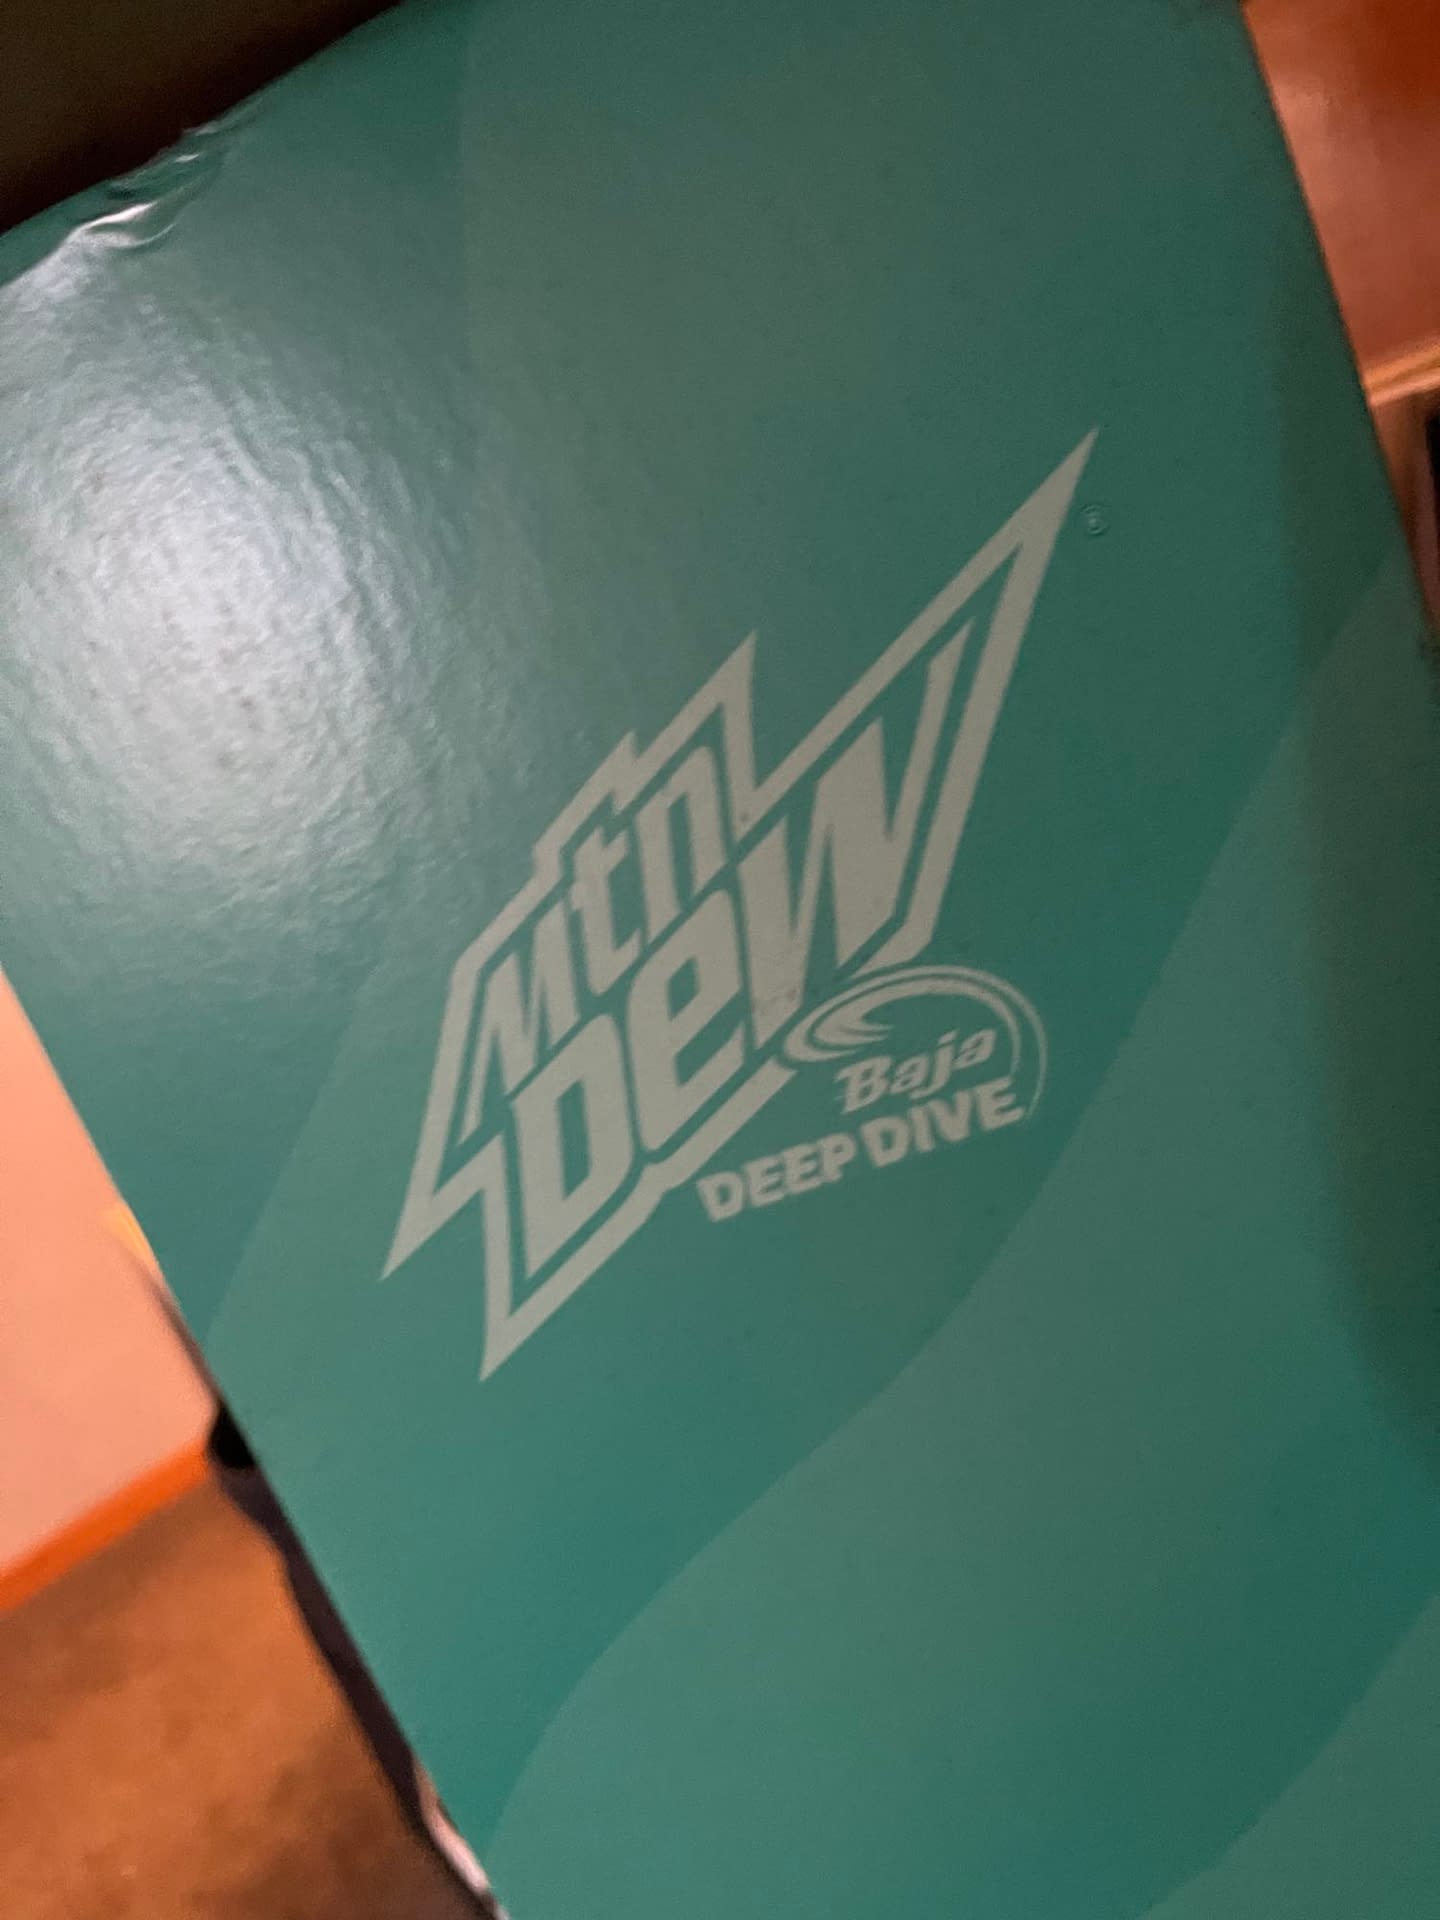 We Uncover the Mystery of the Exclusive Mtn Dew Baja Deep Dive 